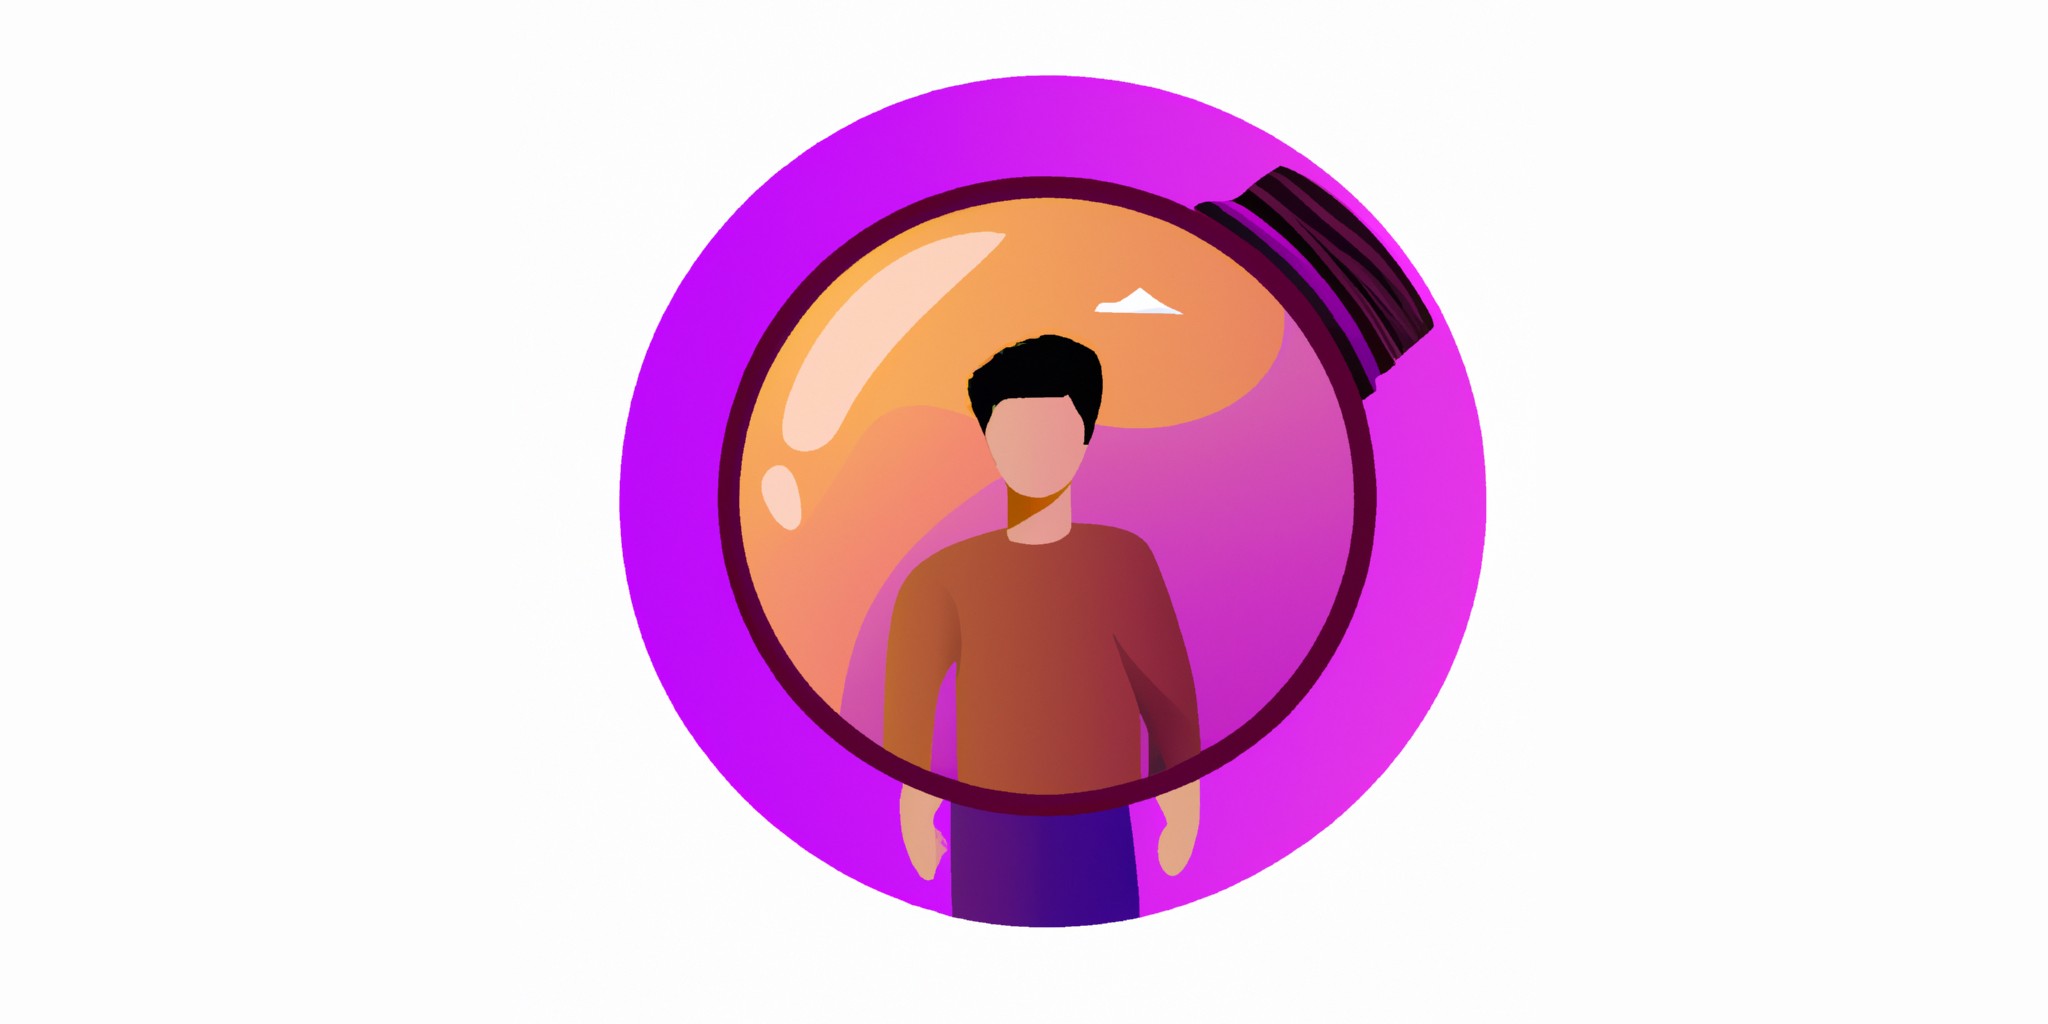 a lens with a person in front in flat illustration style with gradients and white background